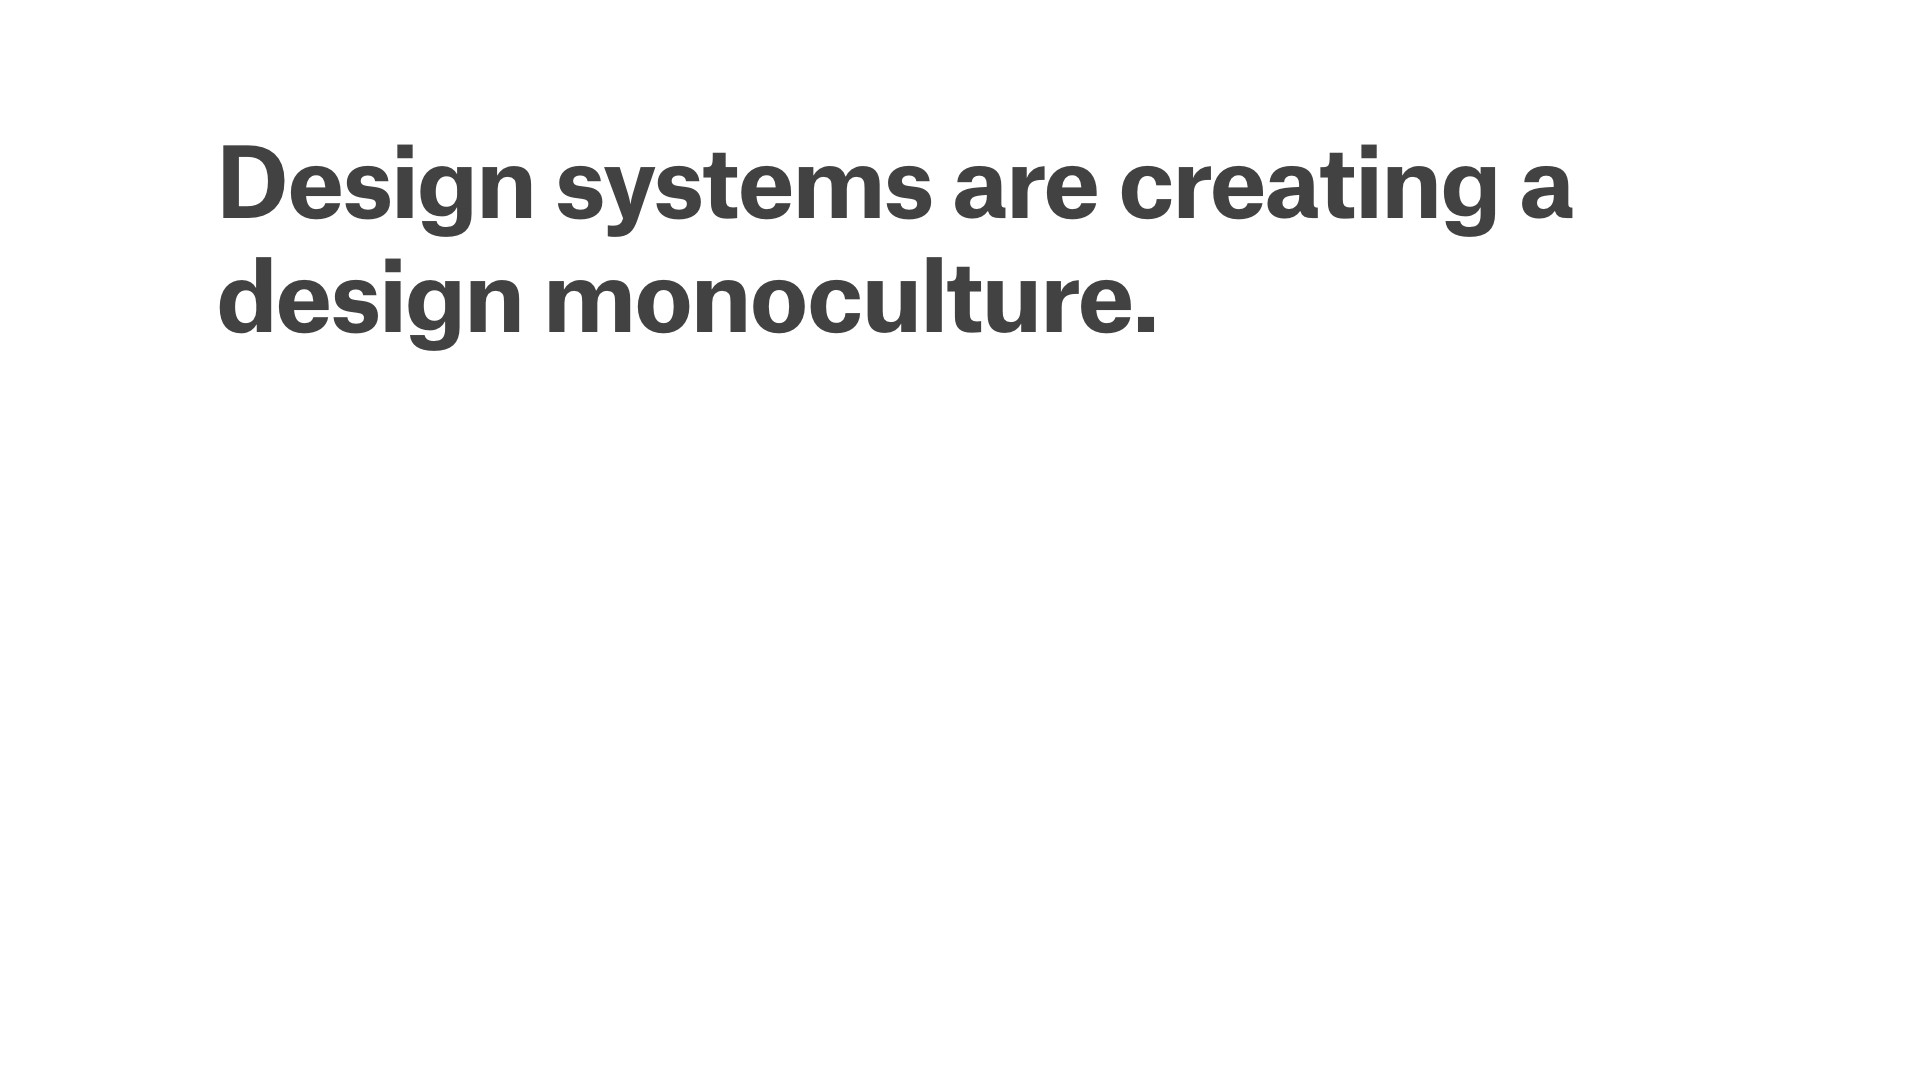 Design systems are creating visual monoculture.